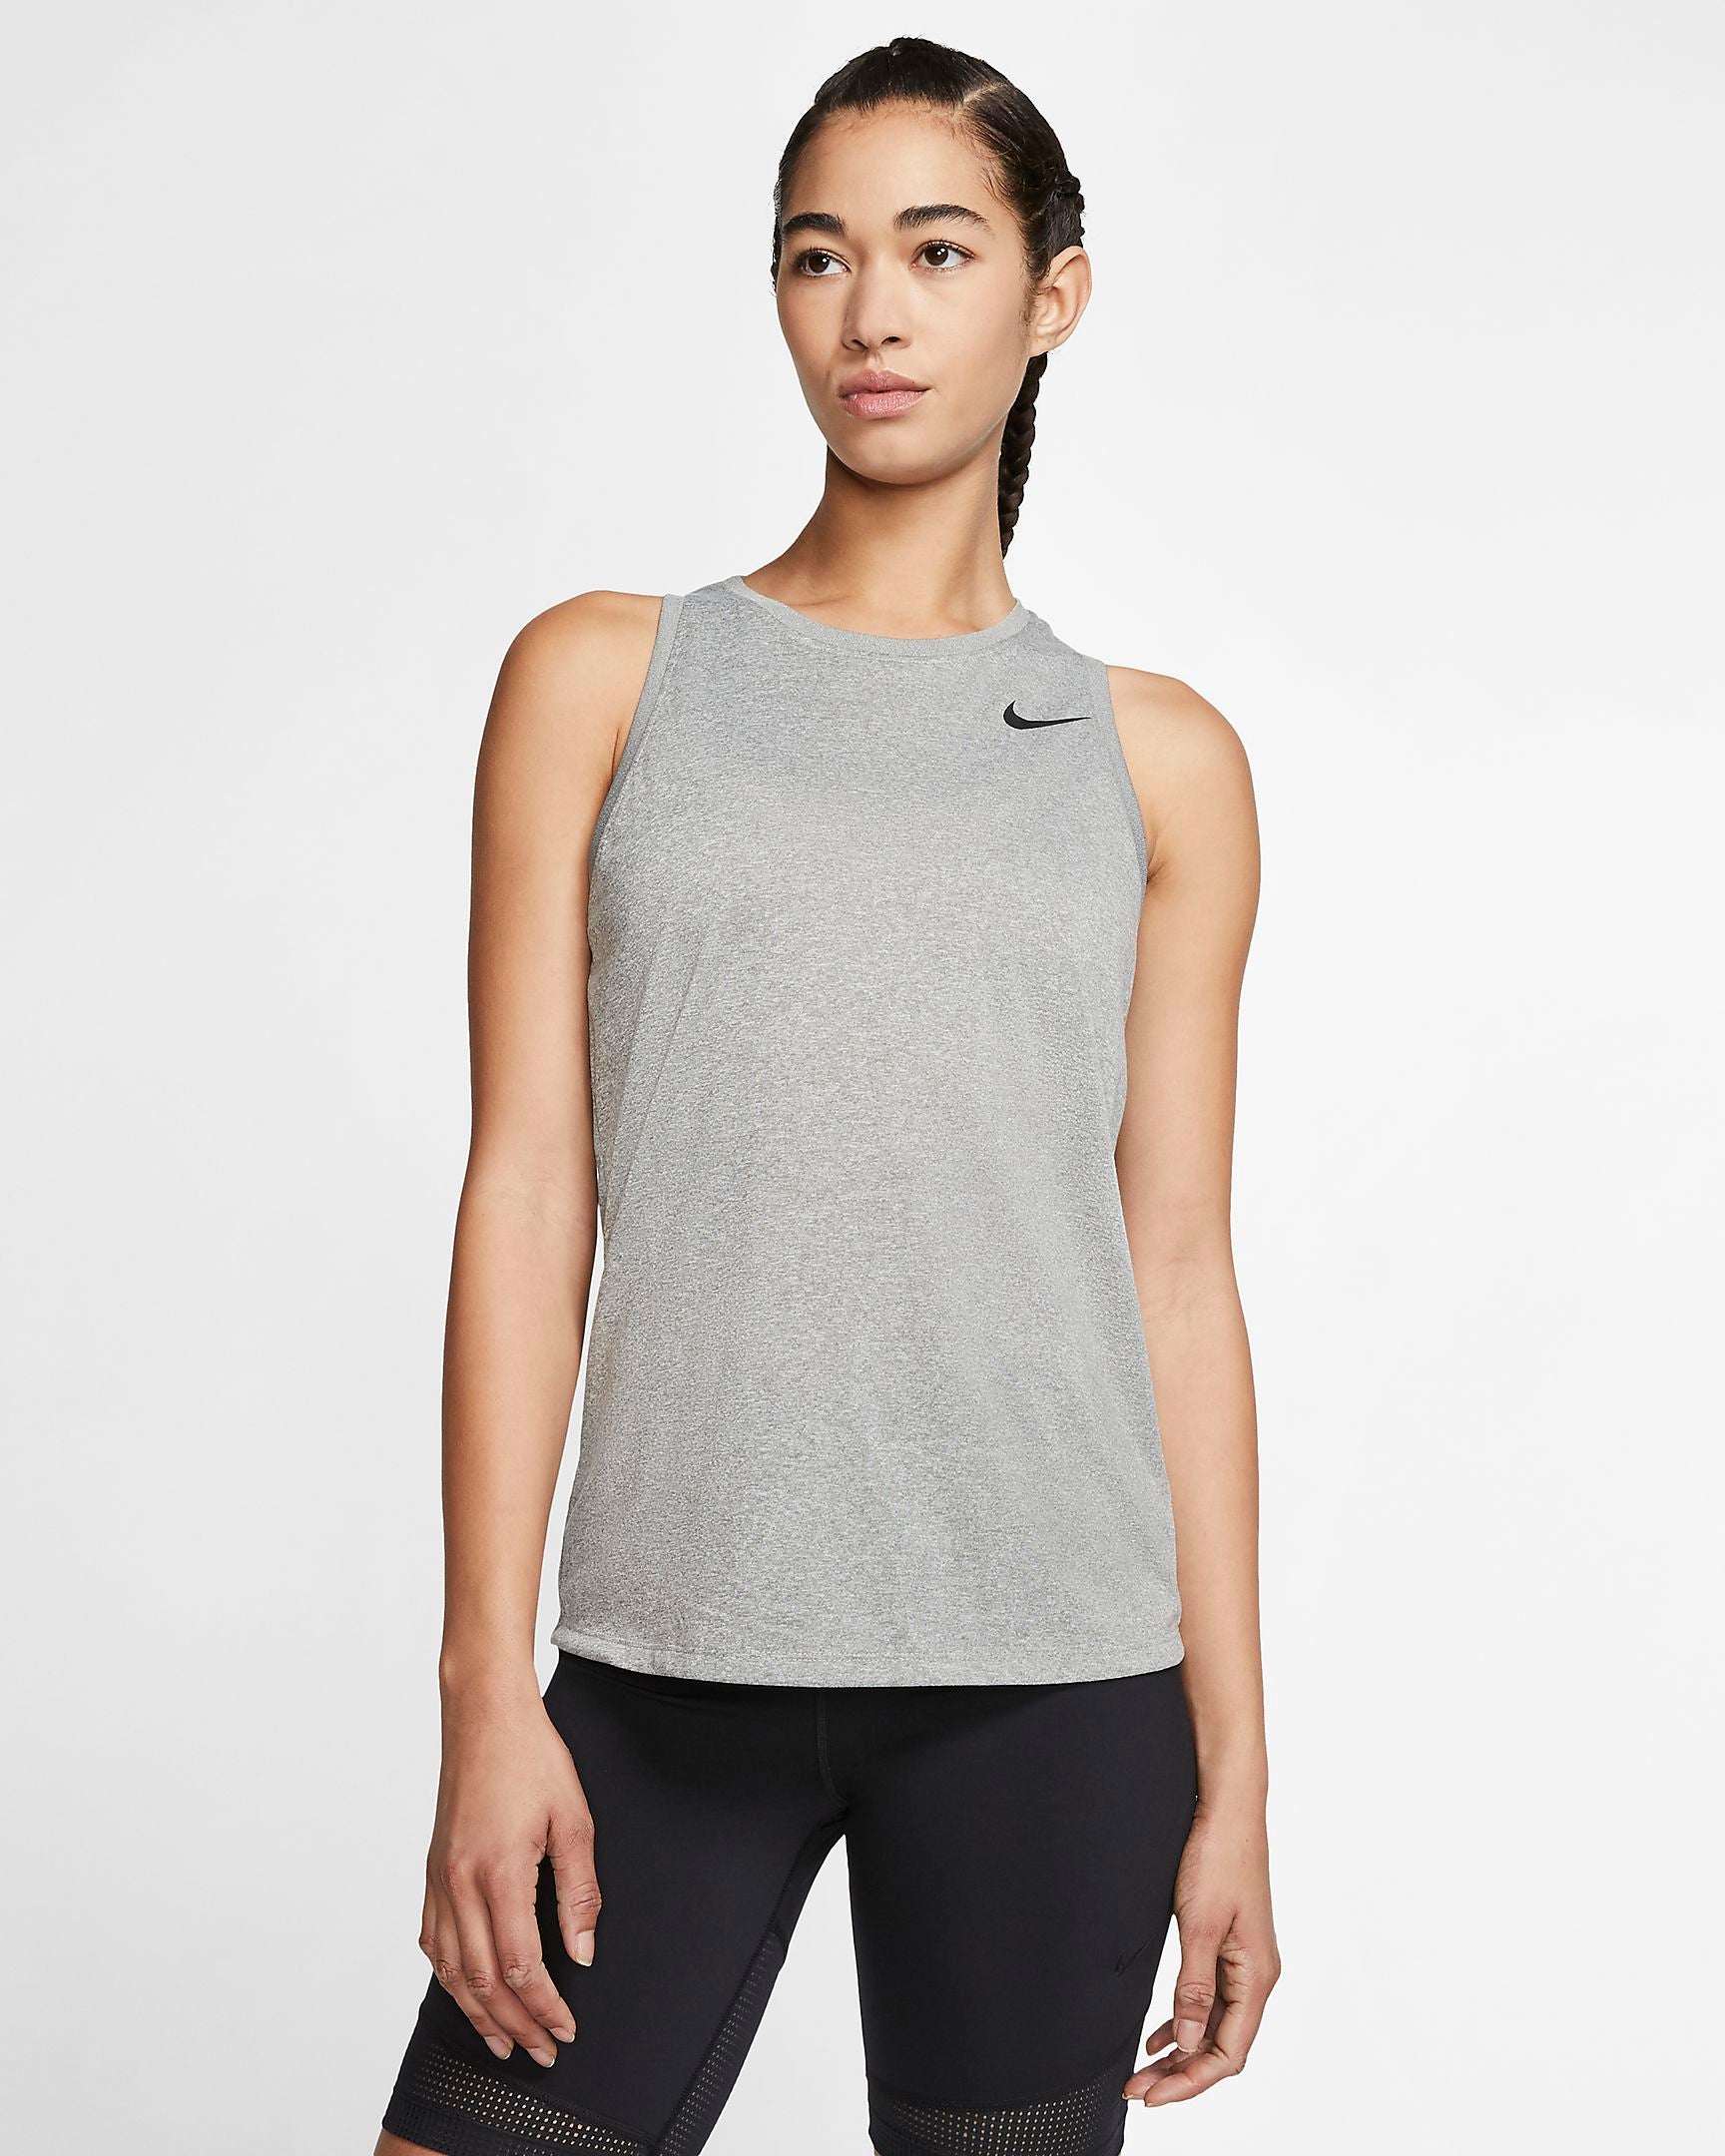 5 pieces of athleisure that easily transition from gym to course